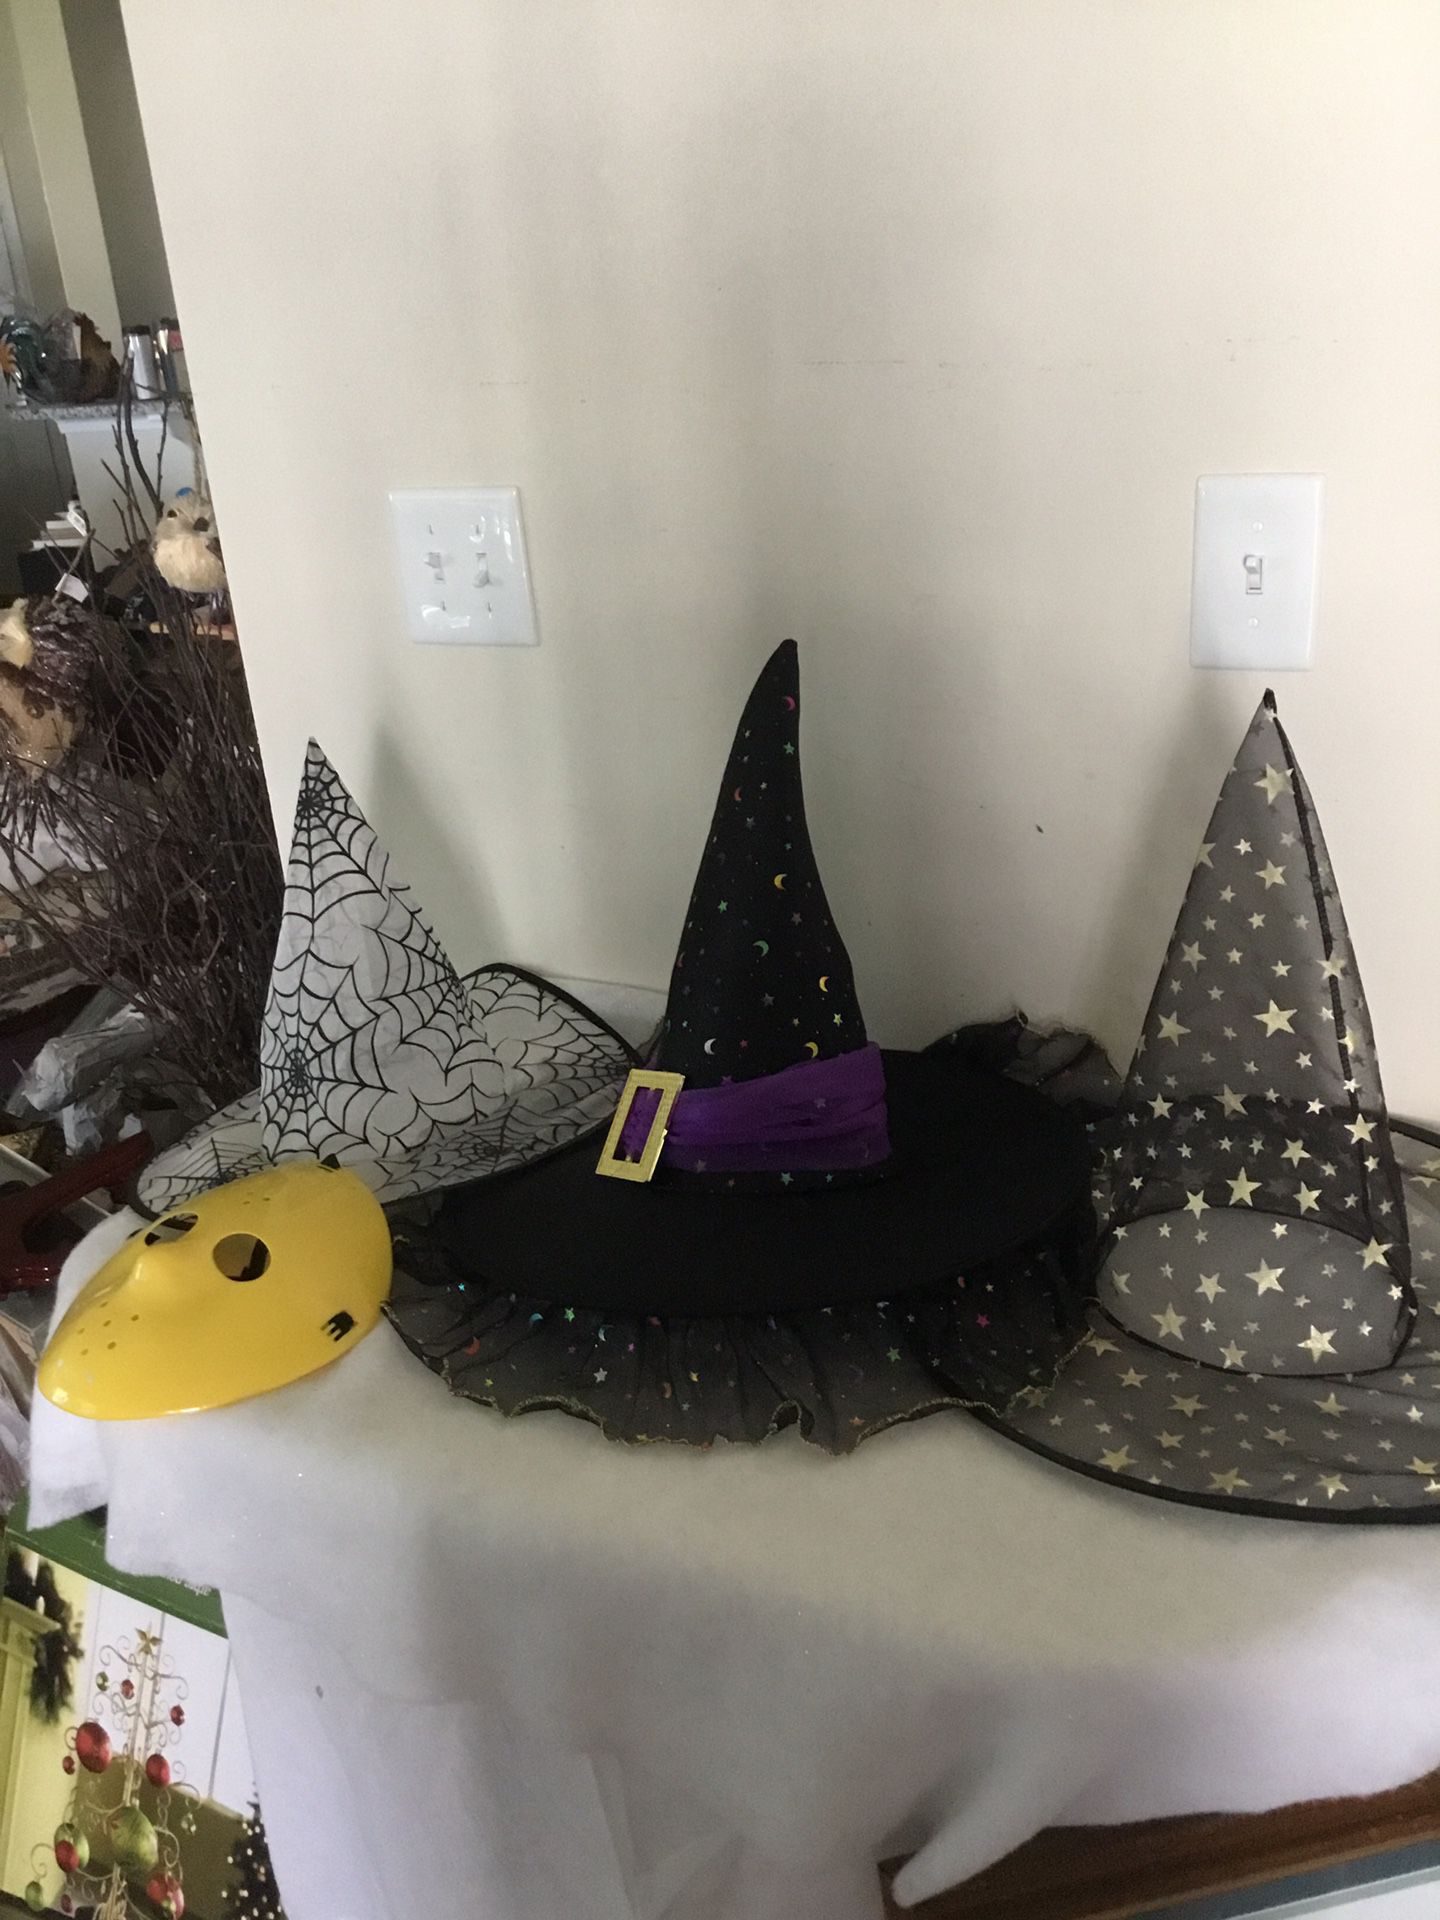 Three Halloween witches hats and one plastic scary mask